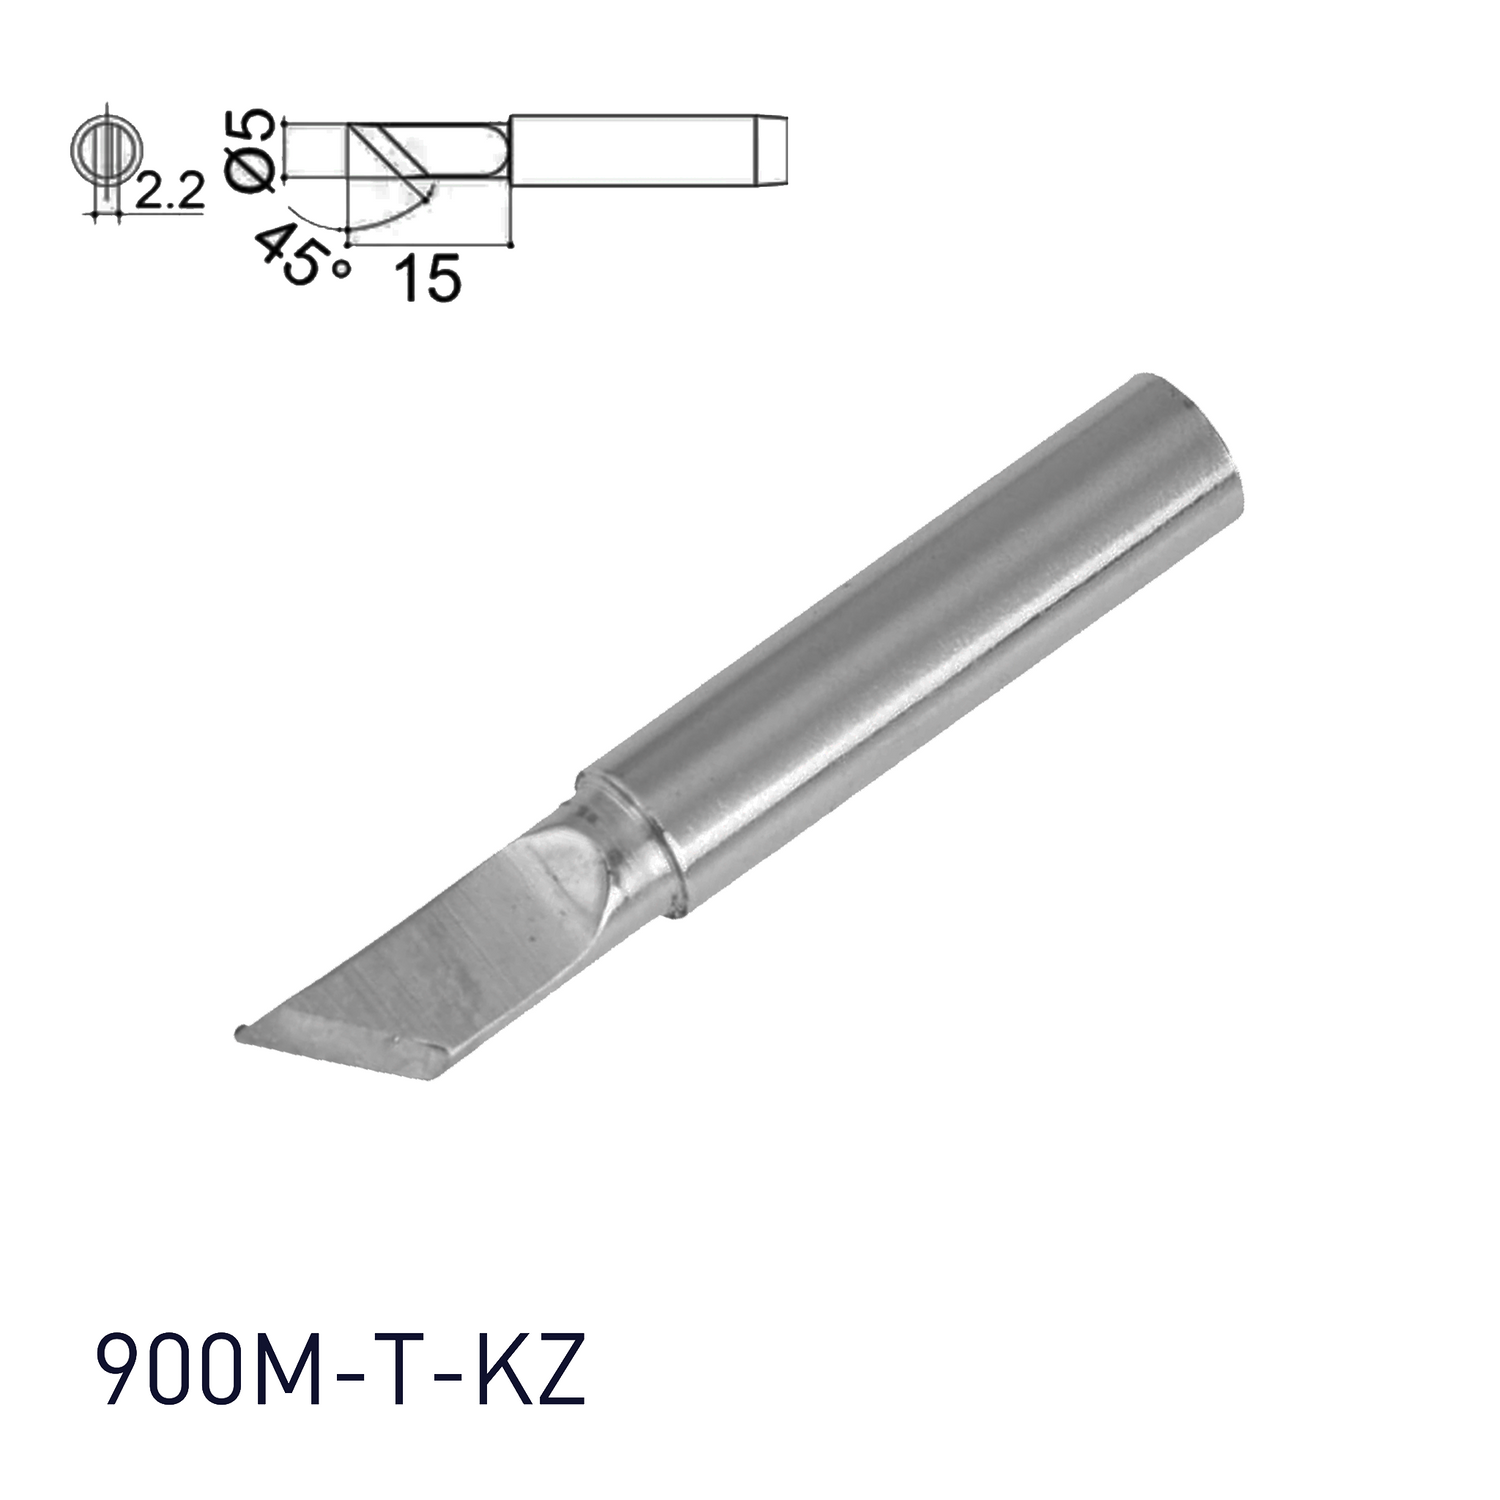 Hakko 900M-T-KZ Soldering Iron Tips for soldering station 928, 937, 701, 702B, 936, 933/934 and handpieces 900M(ESD), 907, 933907, 933ucts Pte Ltd